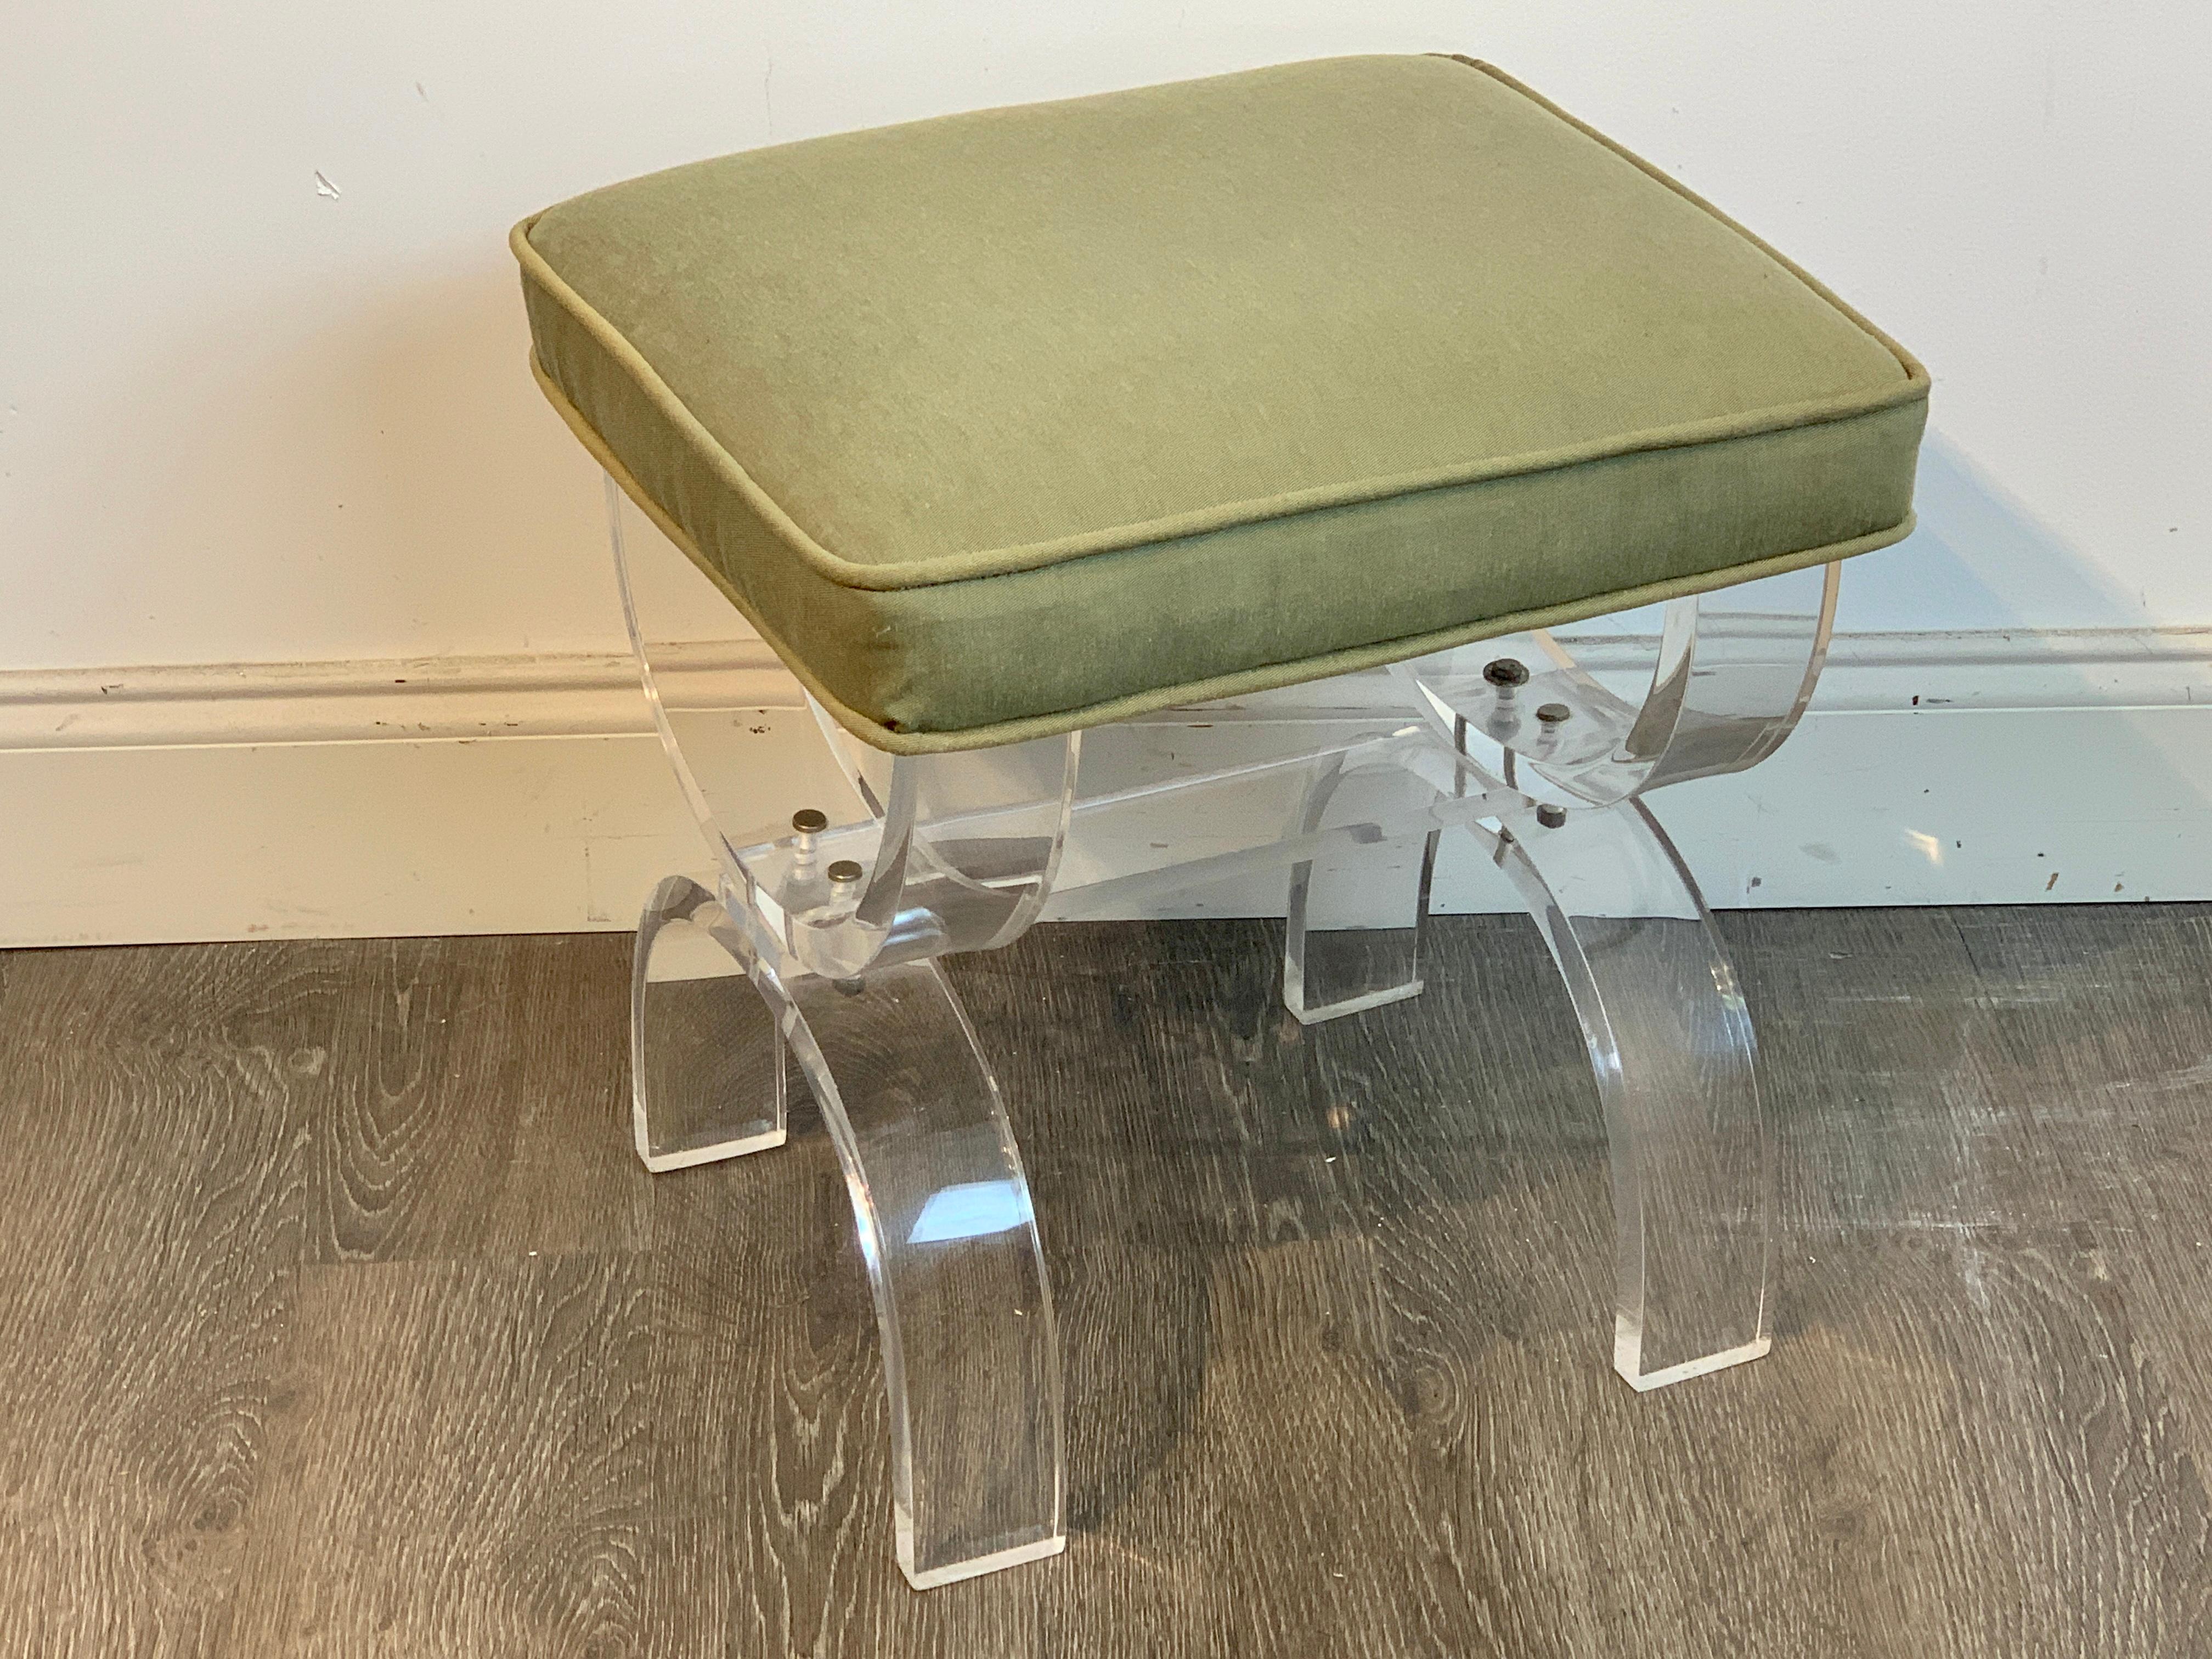 Midcentury Lucite curule bench, in excellent well cared condition, crisp and clear Lucite, no crazing, and sturdy. This item is located at our West Palm Beach location.